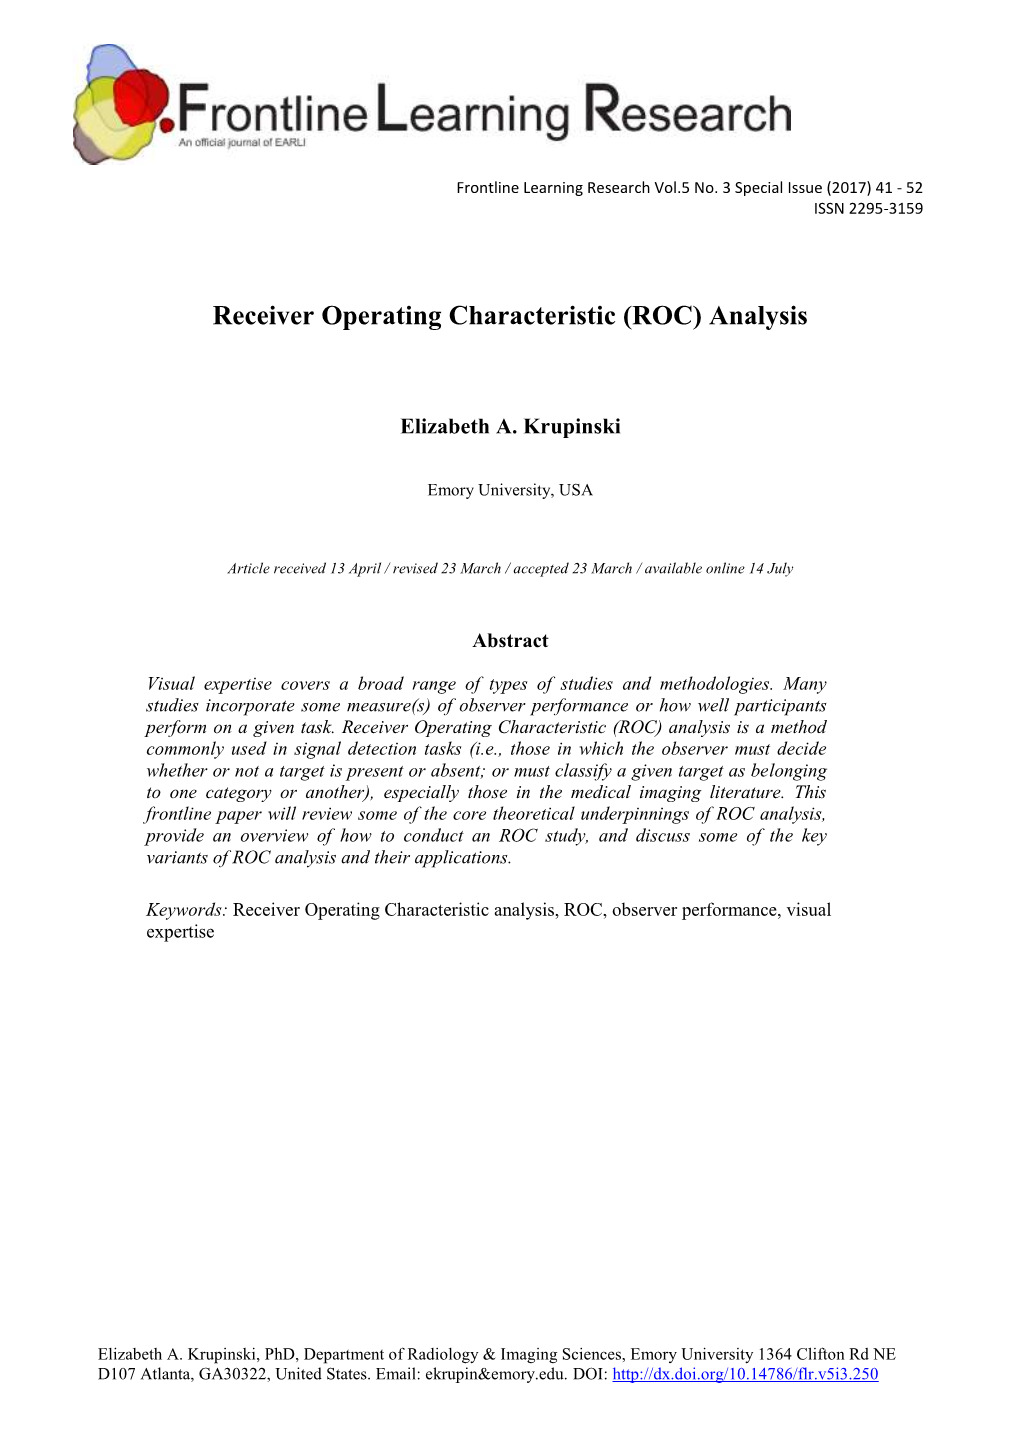 Receiver Operating Characteristic (ROC) Analysis